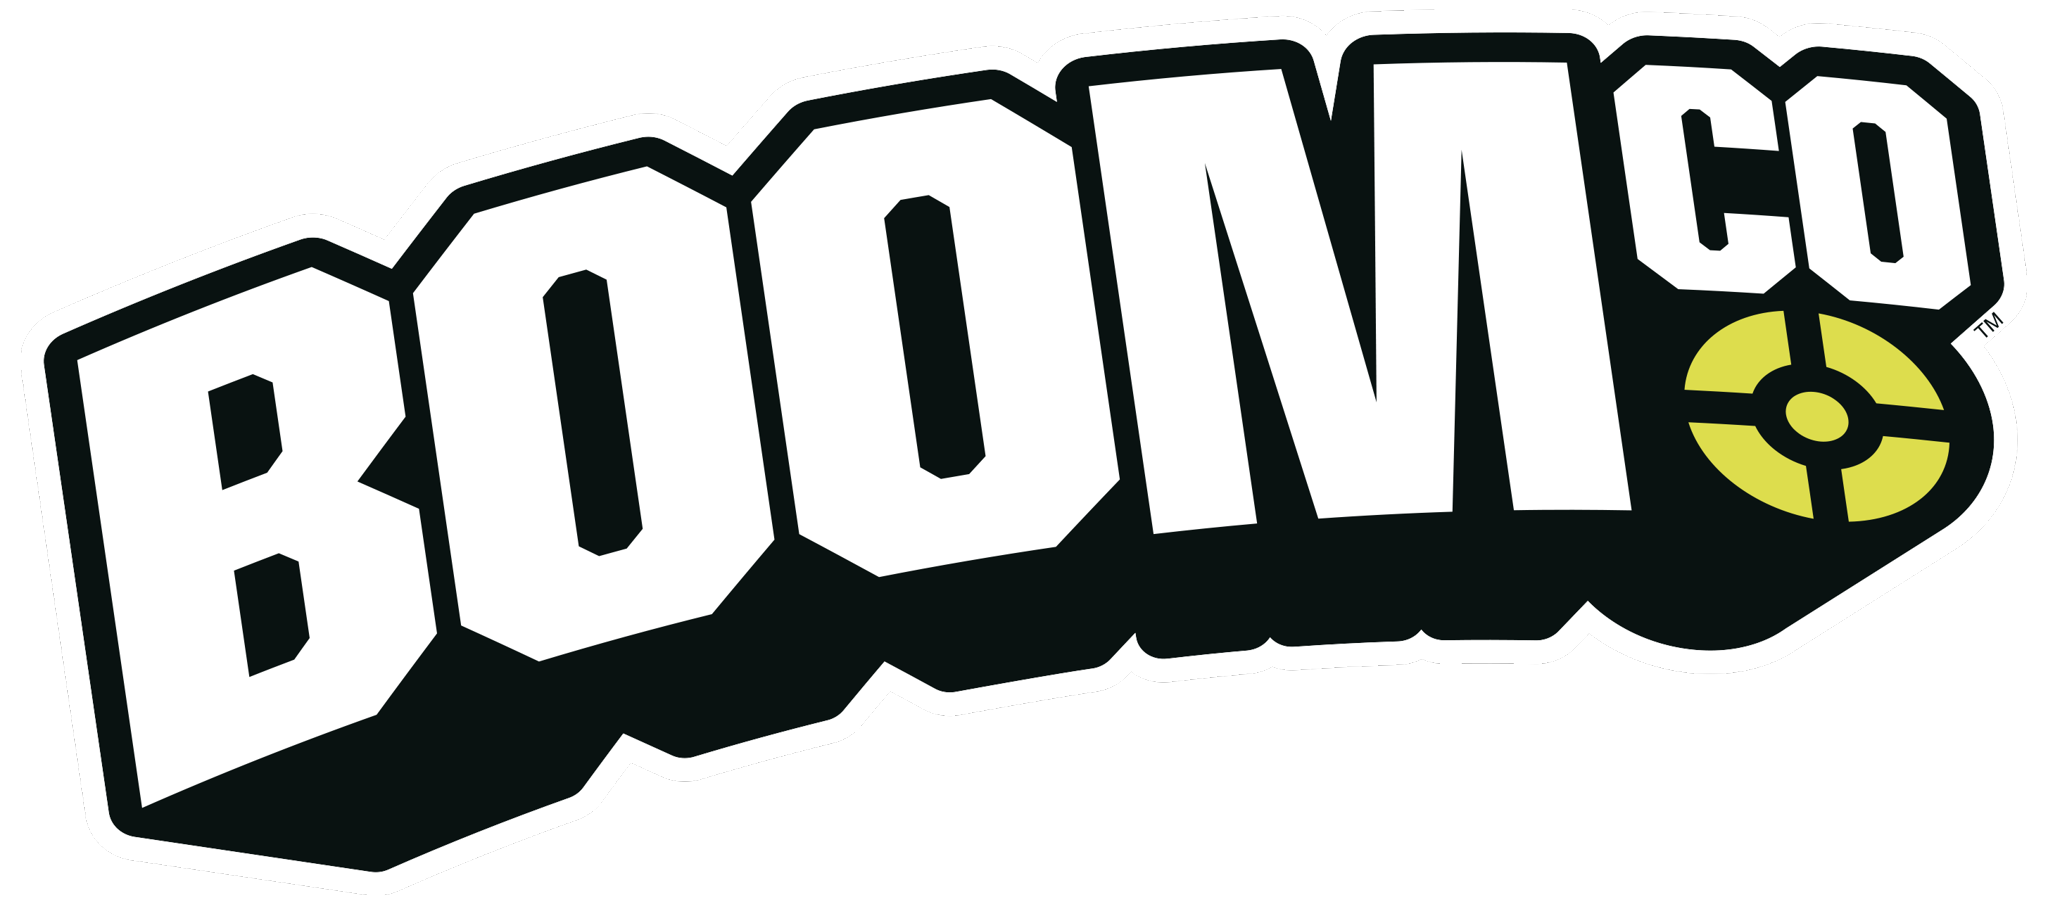 https://file.hstatic.net/1000206615/collection/boomco-logo.png